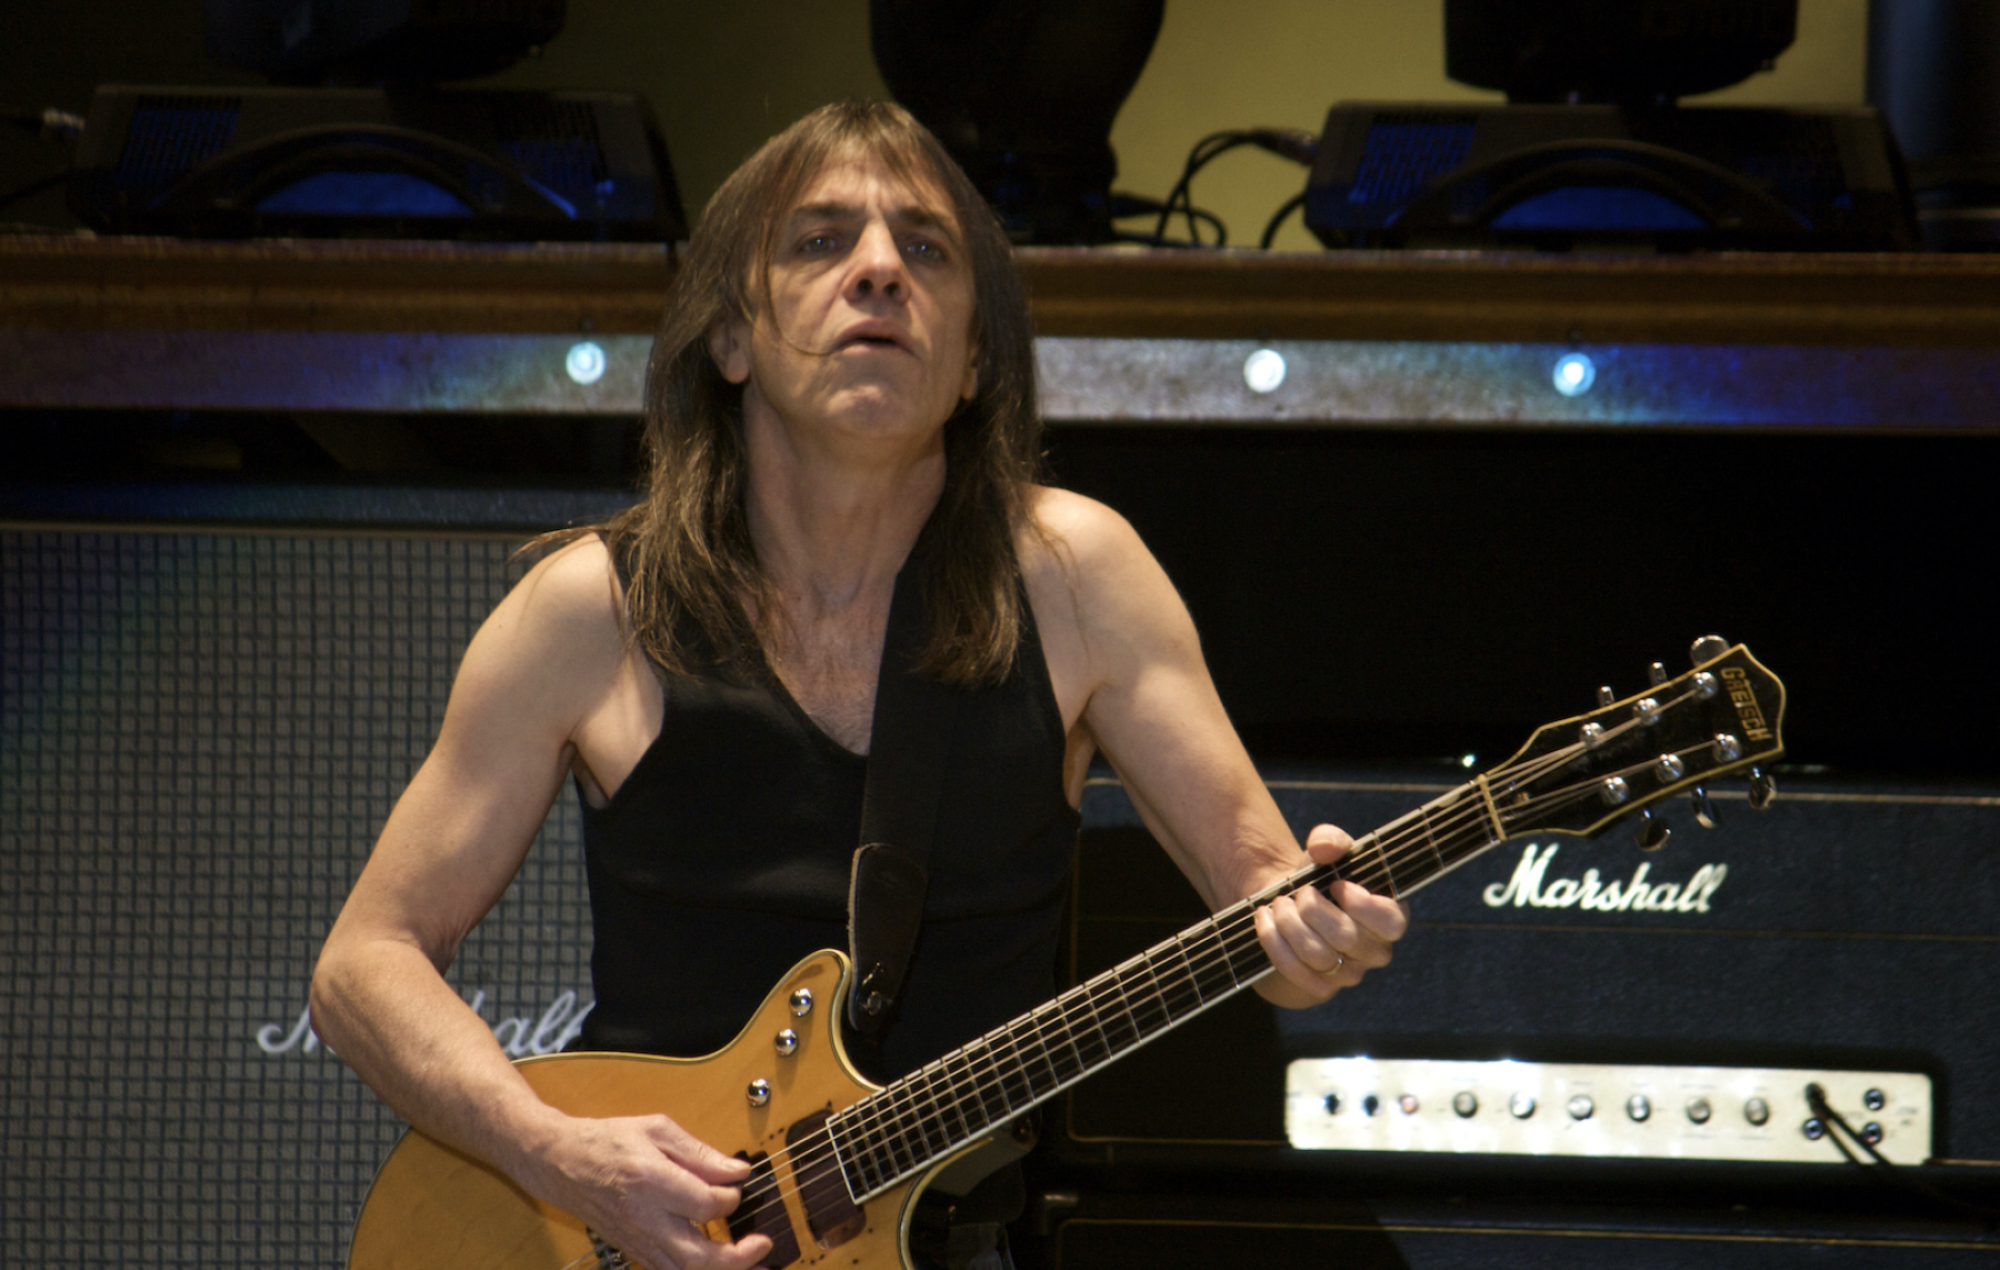 Malcolm Young, Cliff Williams' hope, Malcolm's presence, Music news, 2000x1270 HD Desktop